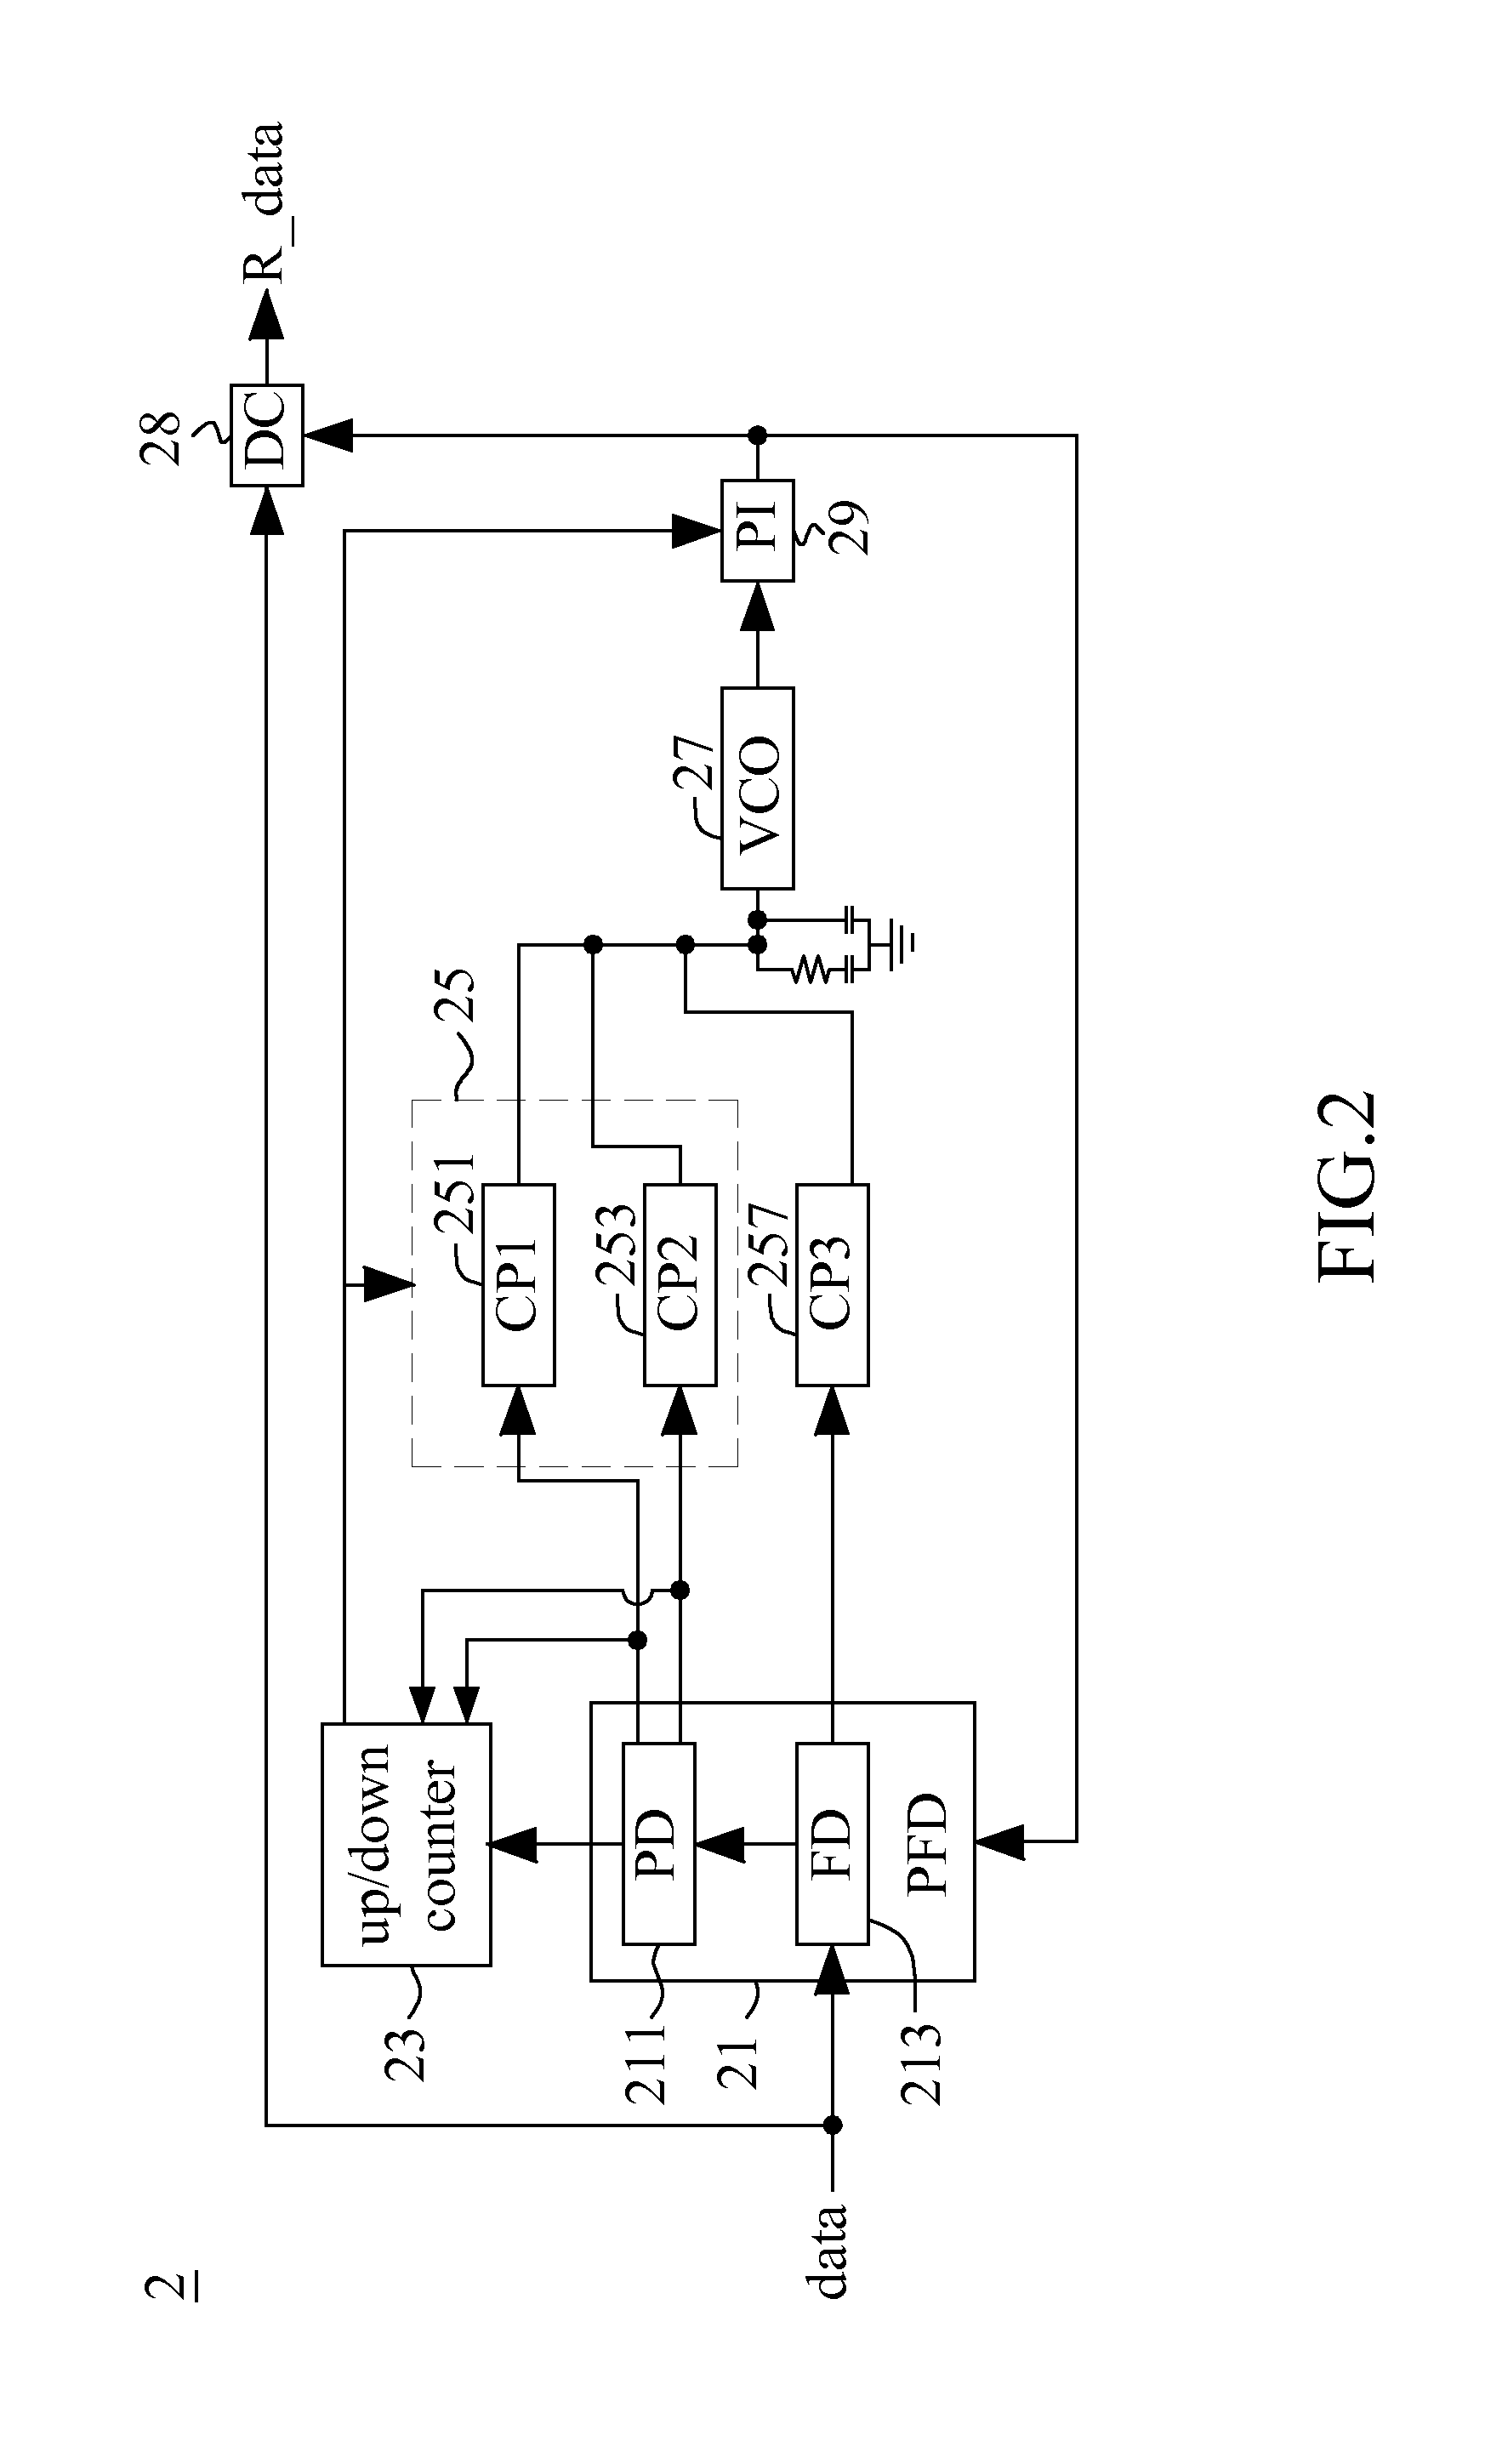 Clock and data recovery (CDR) architecture and phase detector thereof